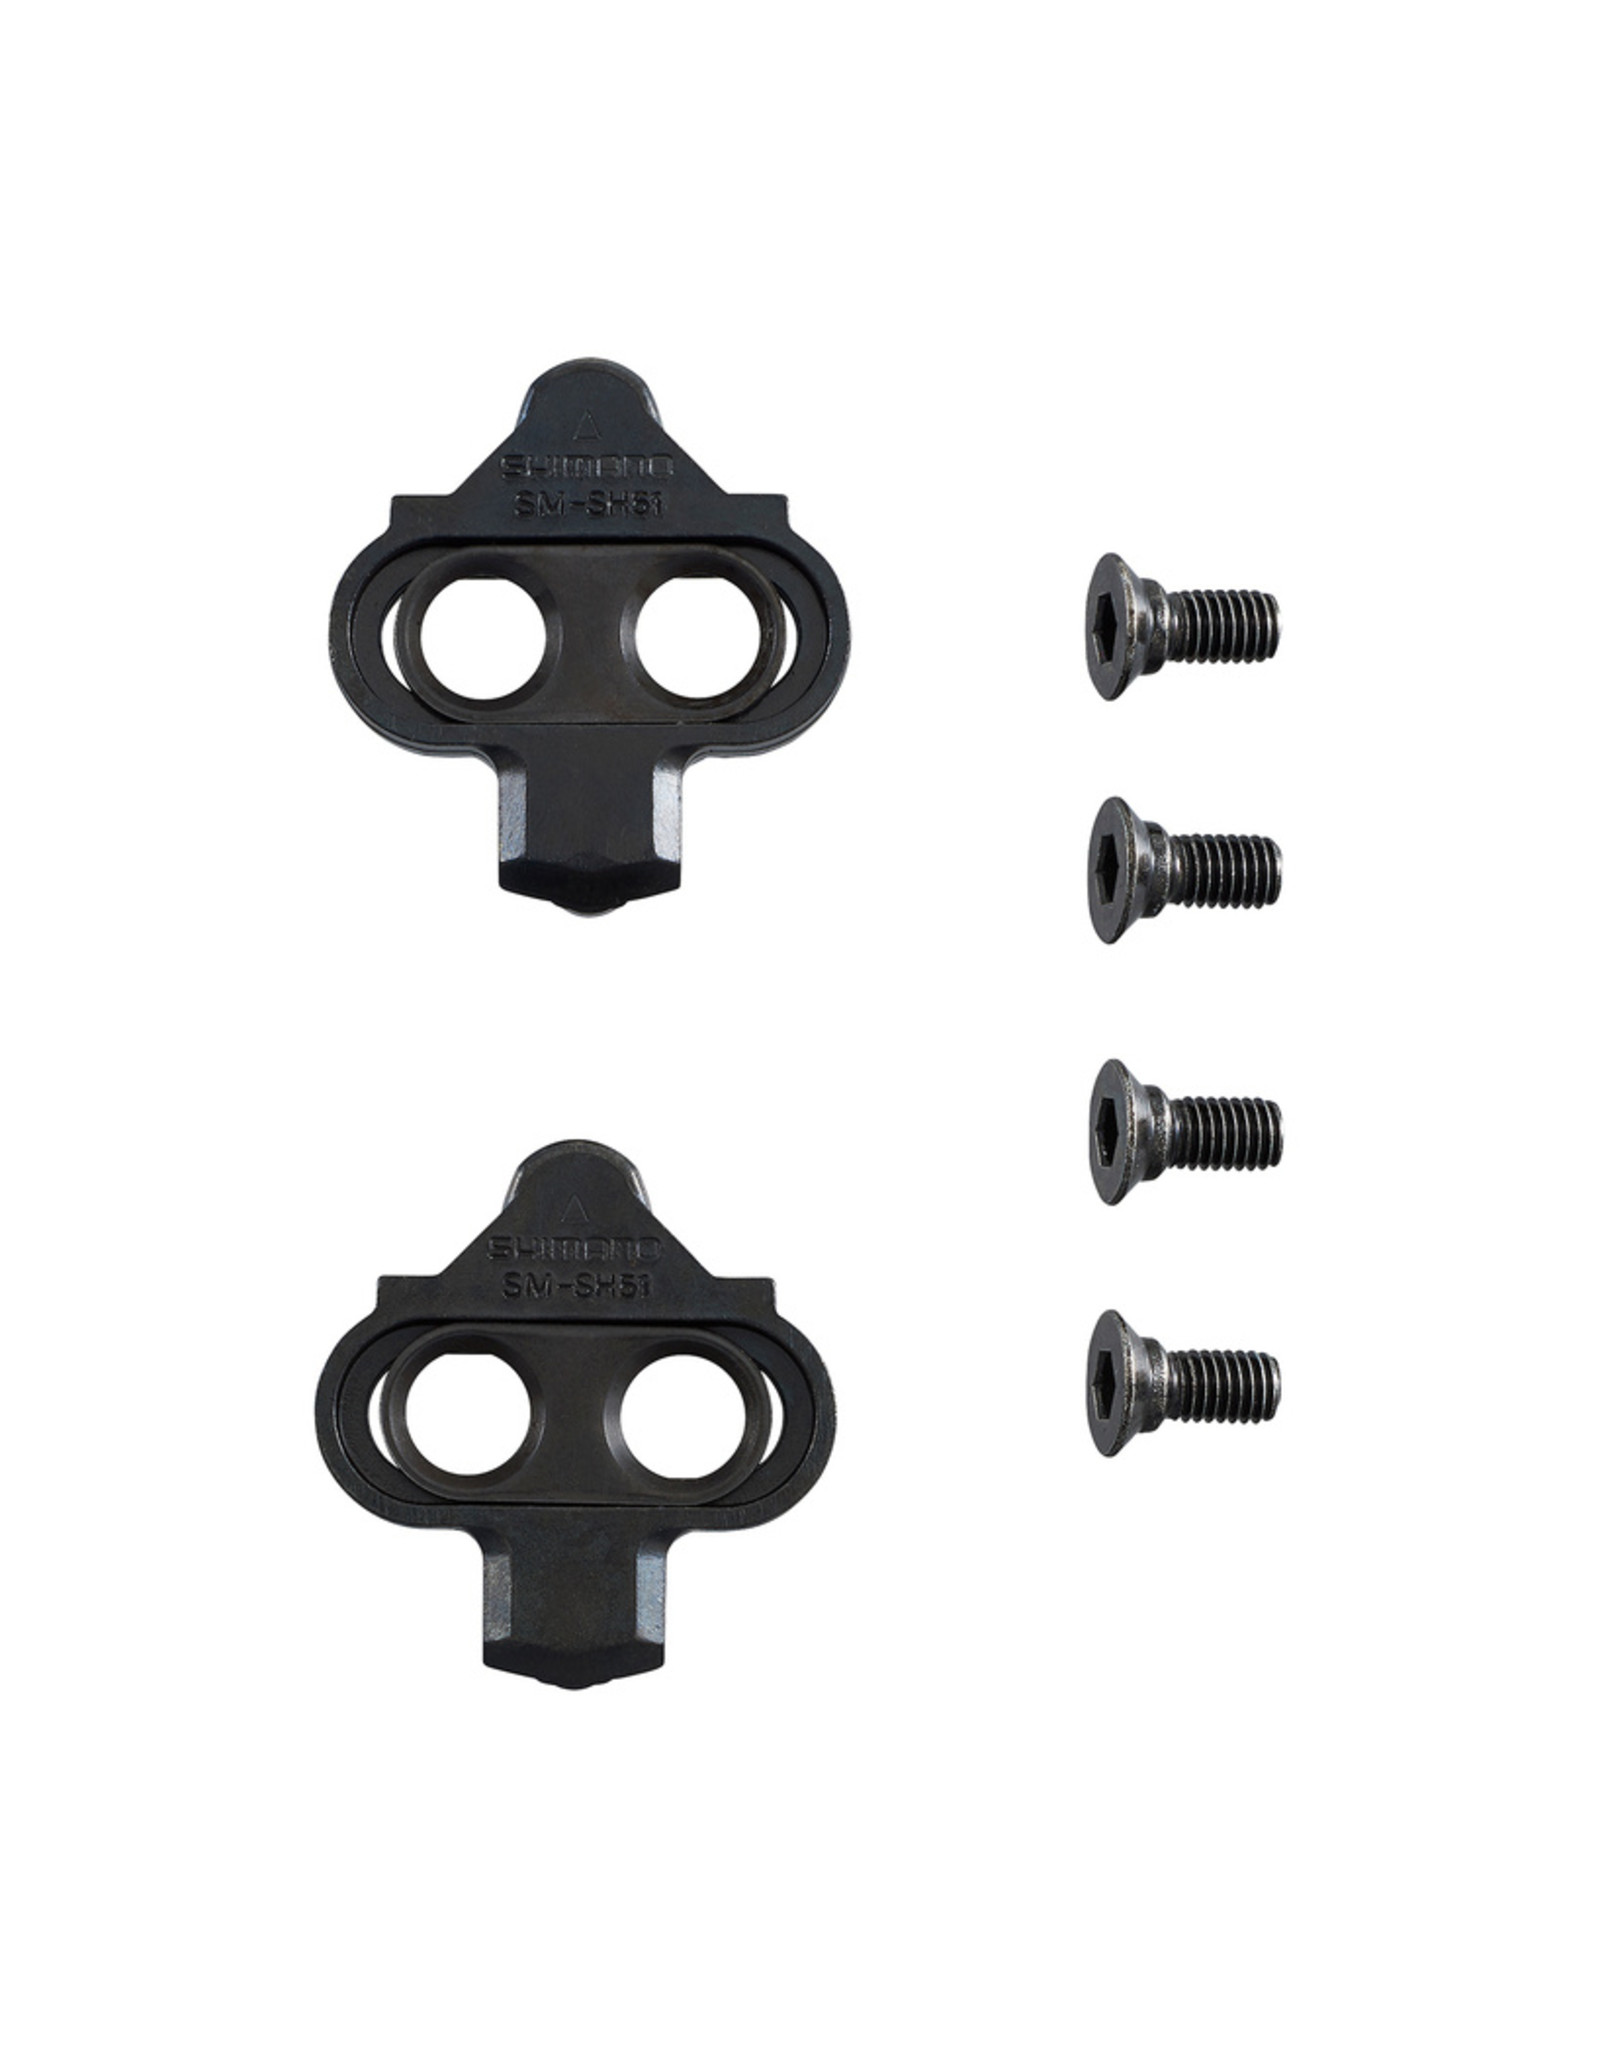 Shimano SM-SH51 SPD CLEAT SET (PAIR) SINGLE RELEASE W/O CLEAT NUT